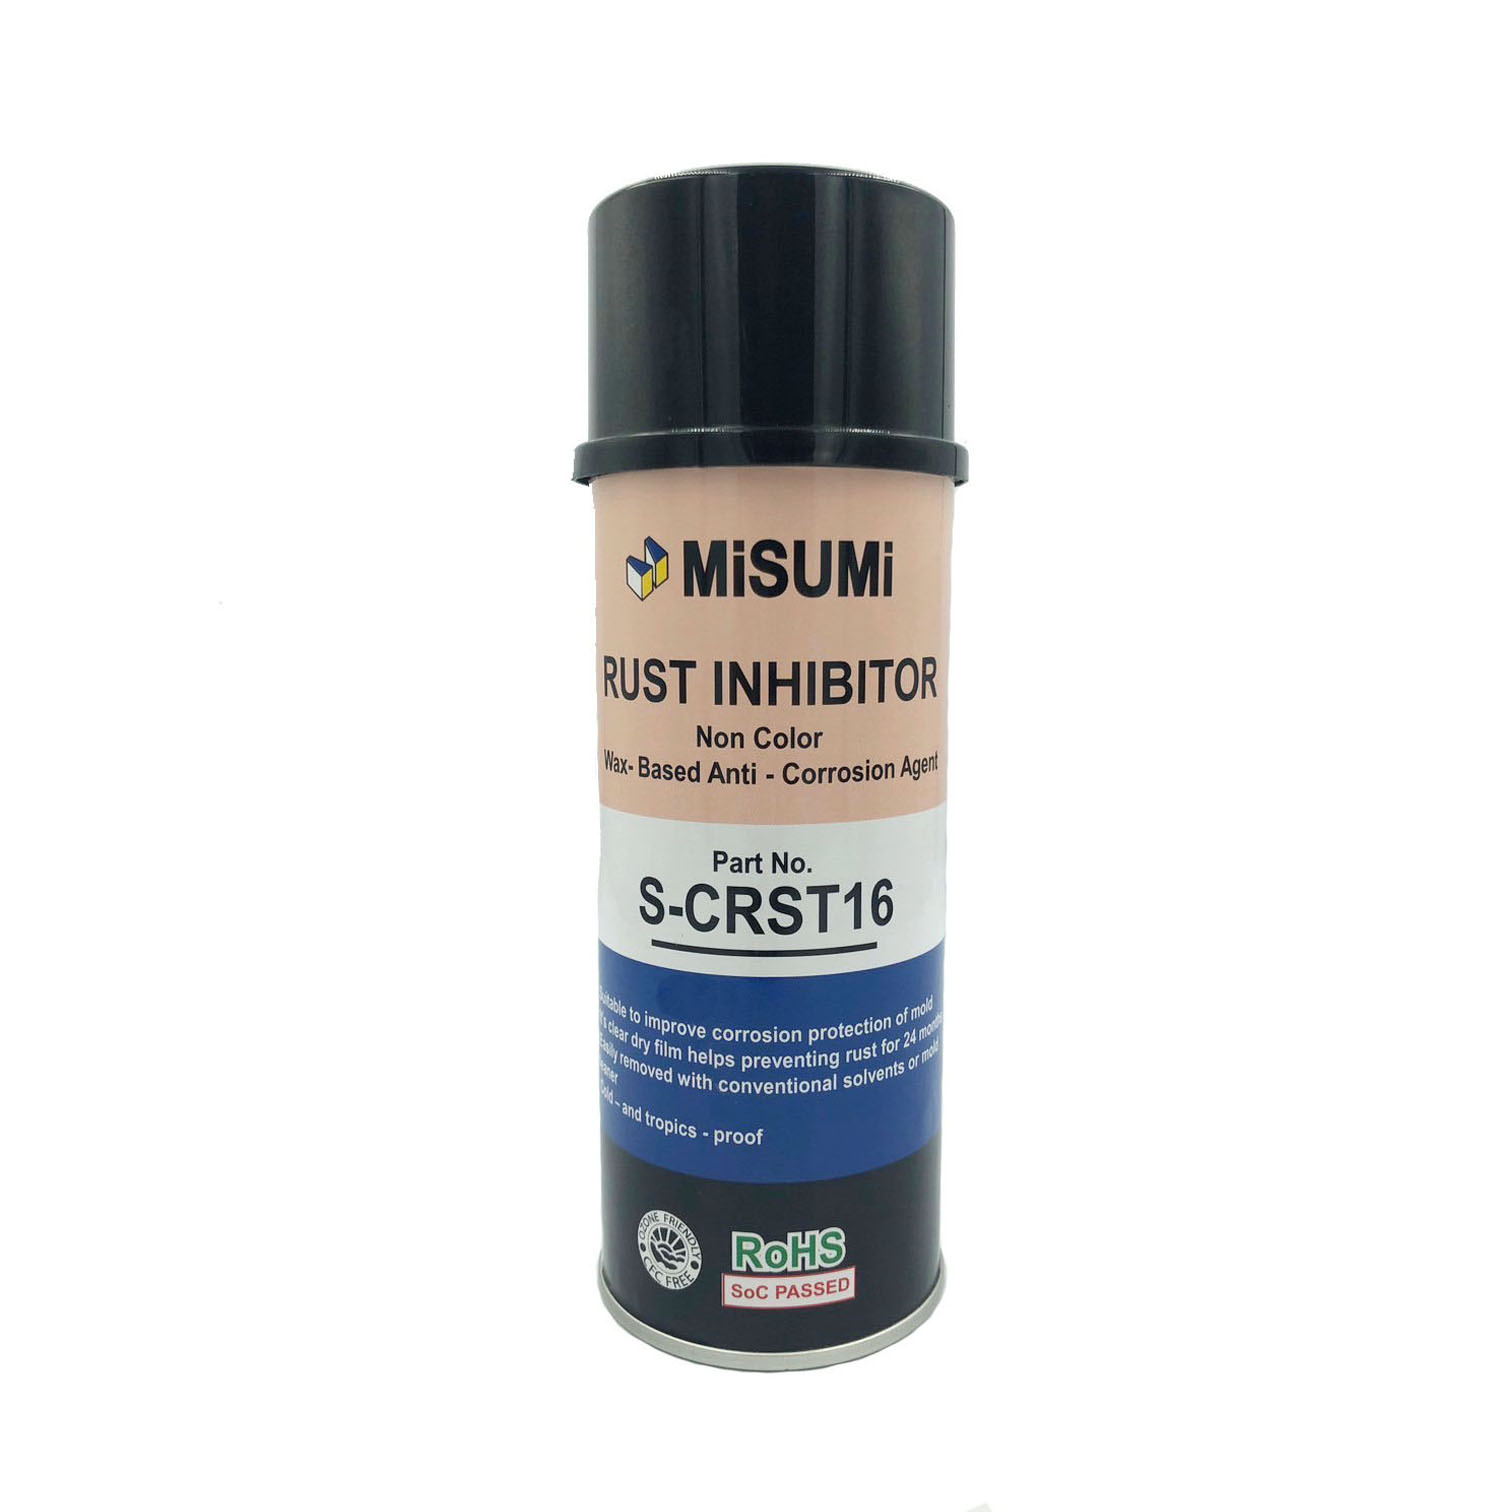 RUST INHIBITOR (NON COLOR)